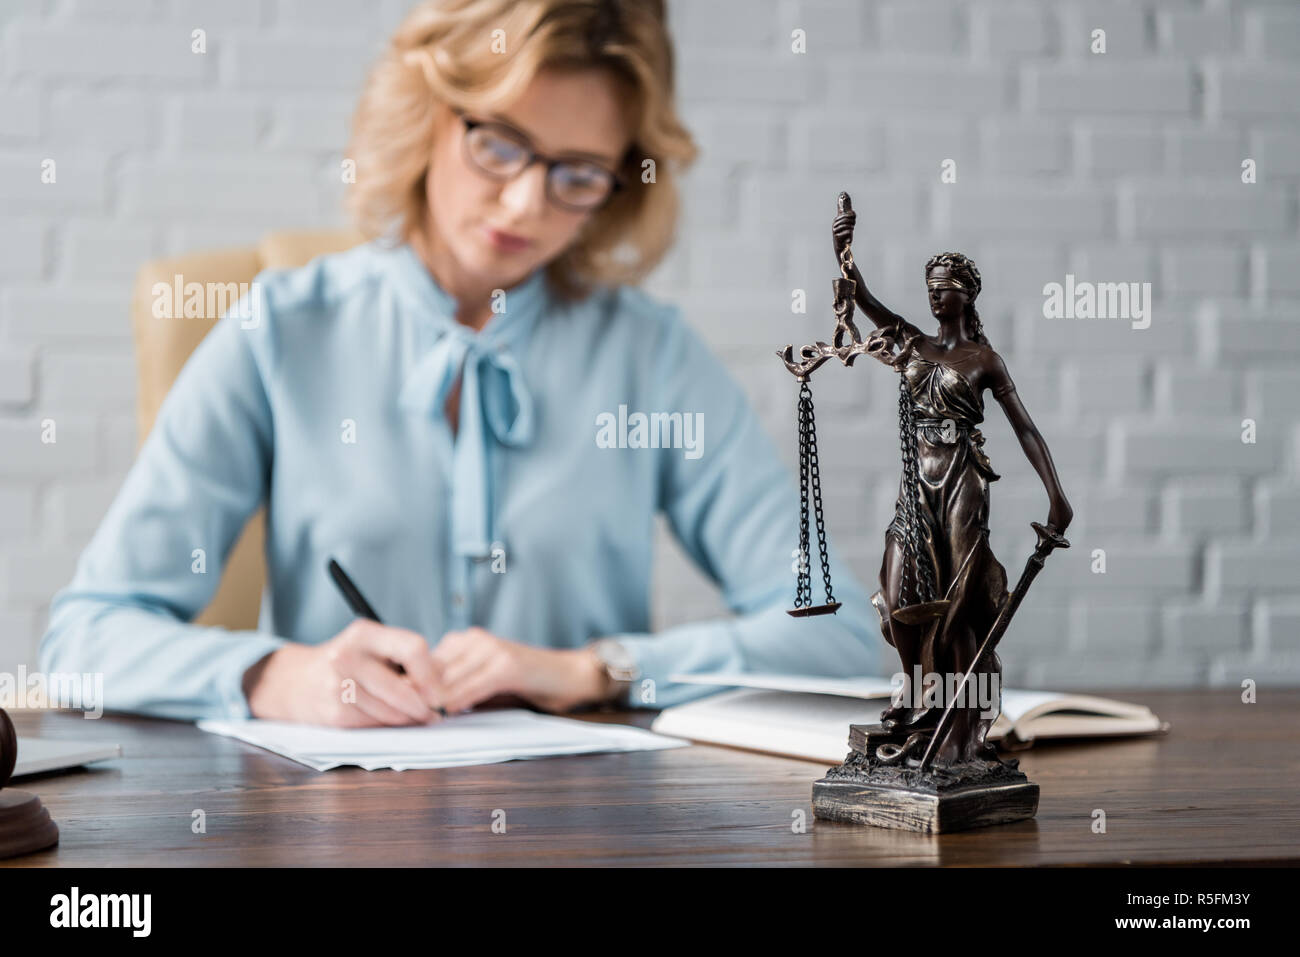 close-up view of lady justice statue and female lawyer working behind Stock Photo